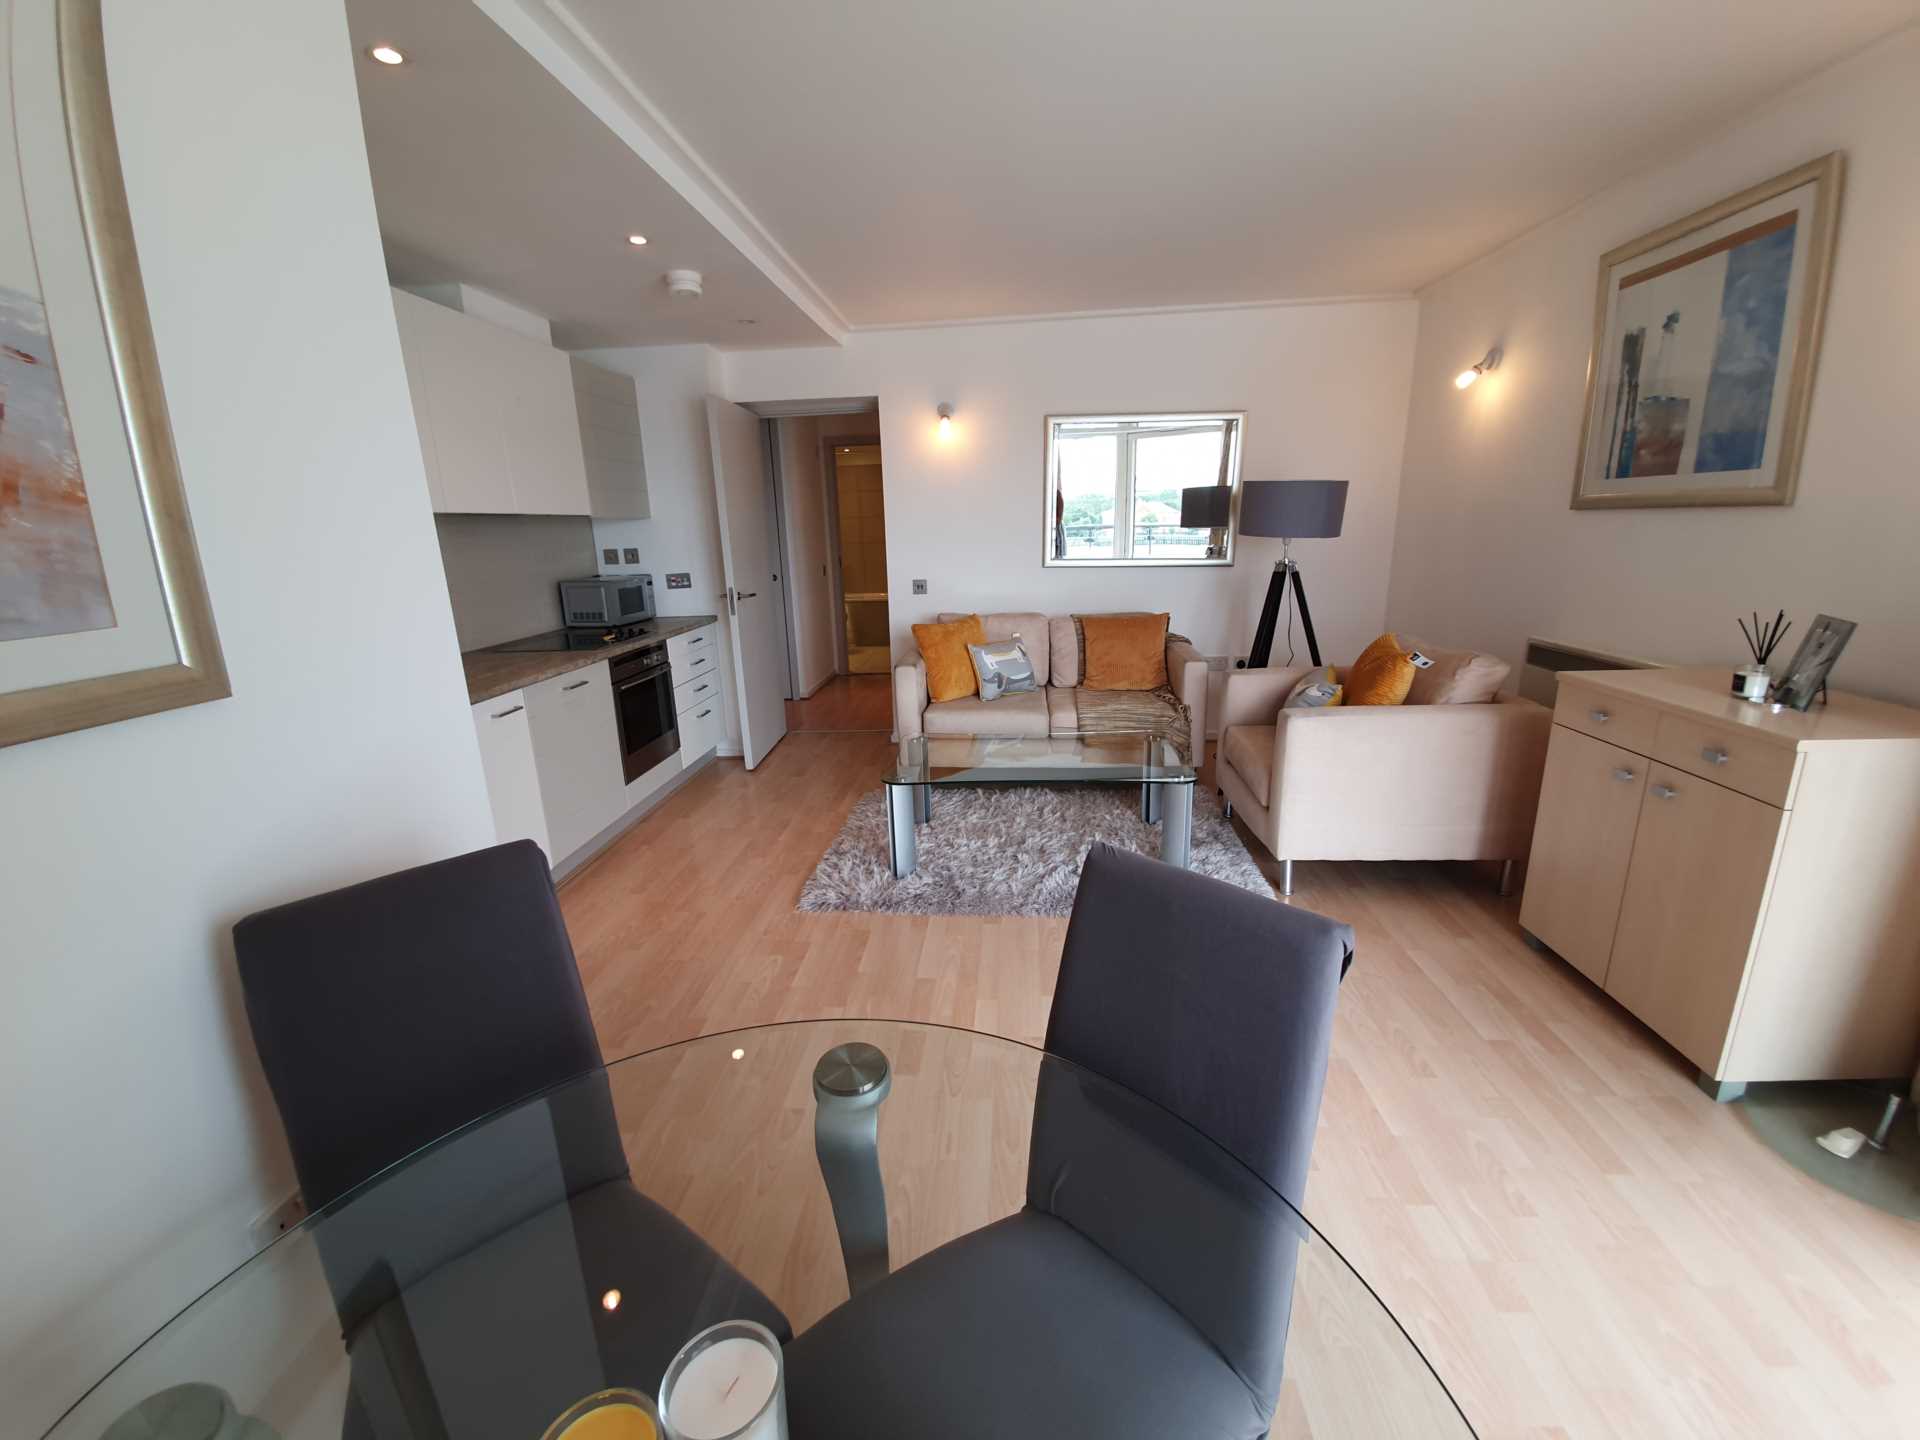 5th Floor, luxury one bedroom in Seacon Tower, E14 8JX, Image 6